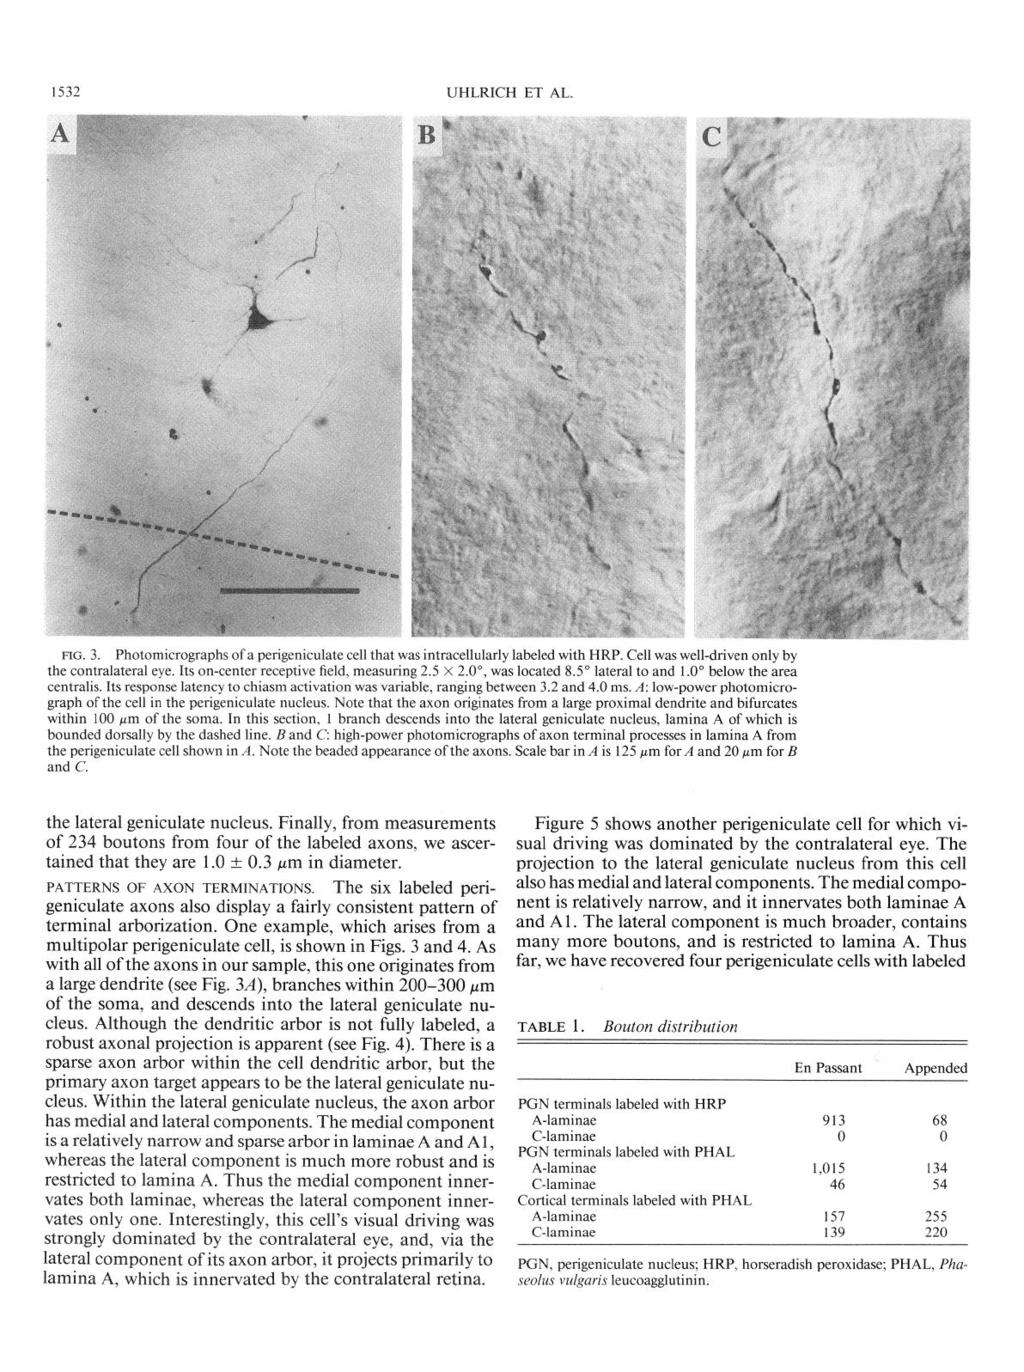 1532 UHLRICH ET AL. FIG. 3. Photomicrographs of a perigeniculate cell that was intracellularly labeled with HRP. Cell was well-driven only by the contralateral eye.